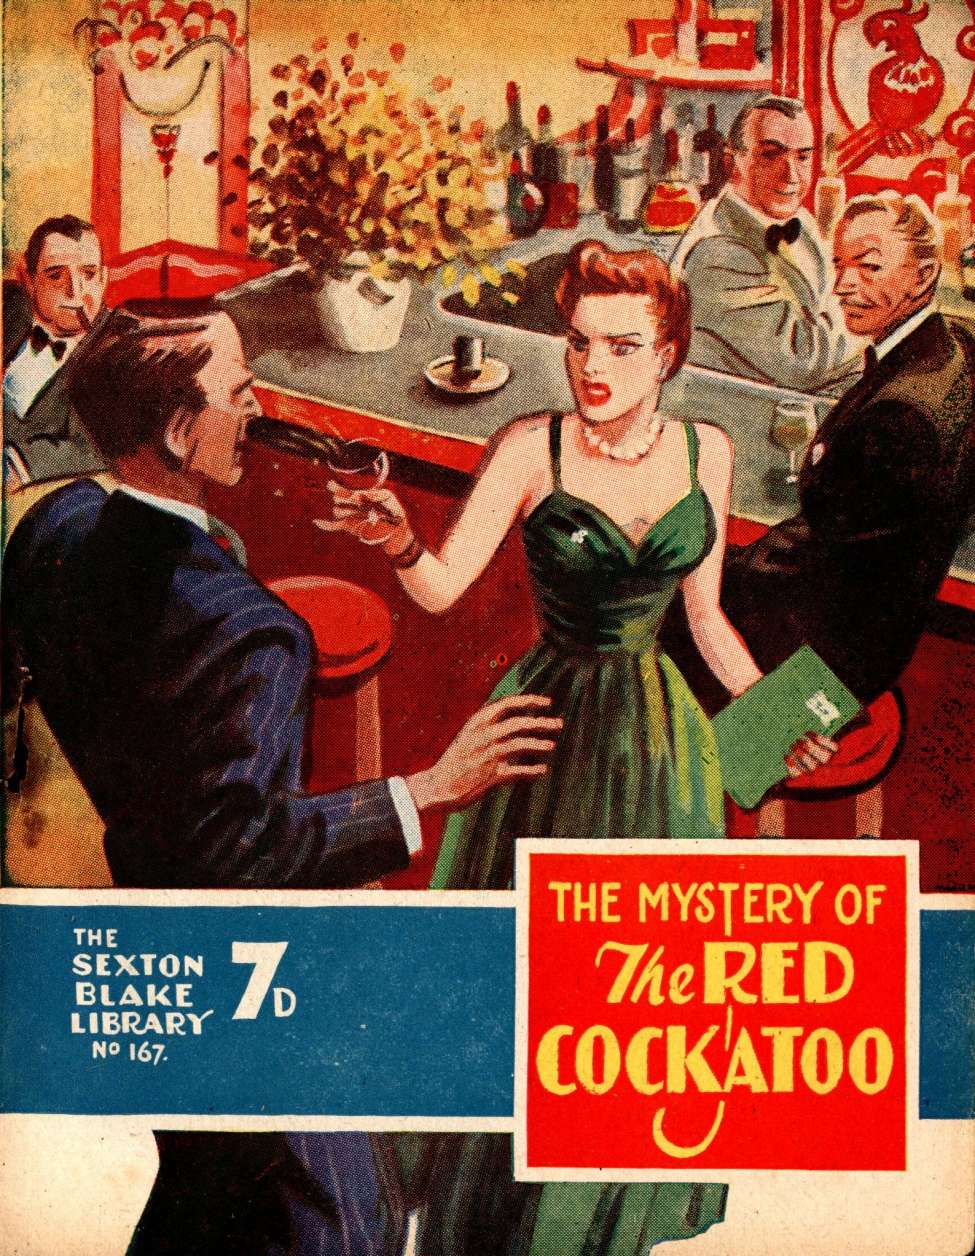 Comic Book Cover For Sexton Blake Library S3 167 - The Mystery of the Red Cockatoo